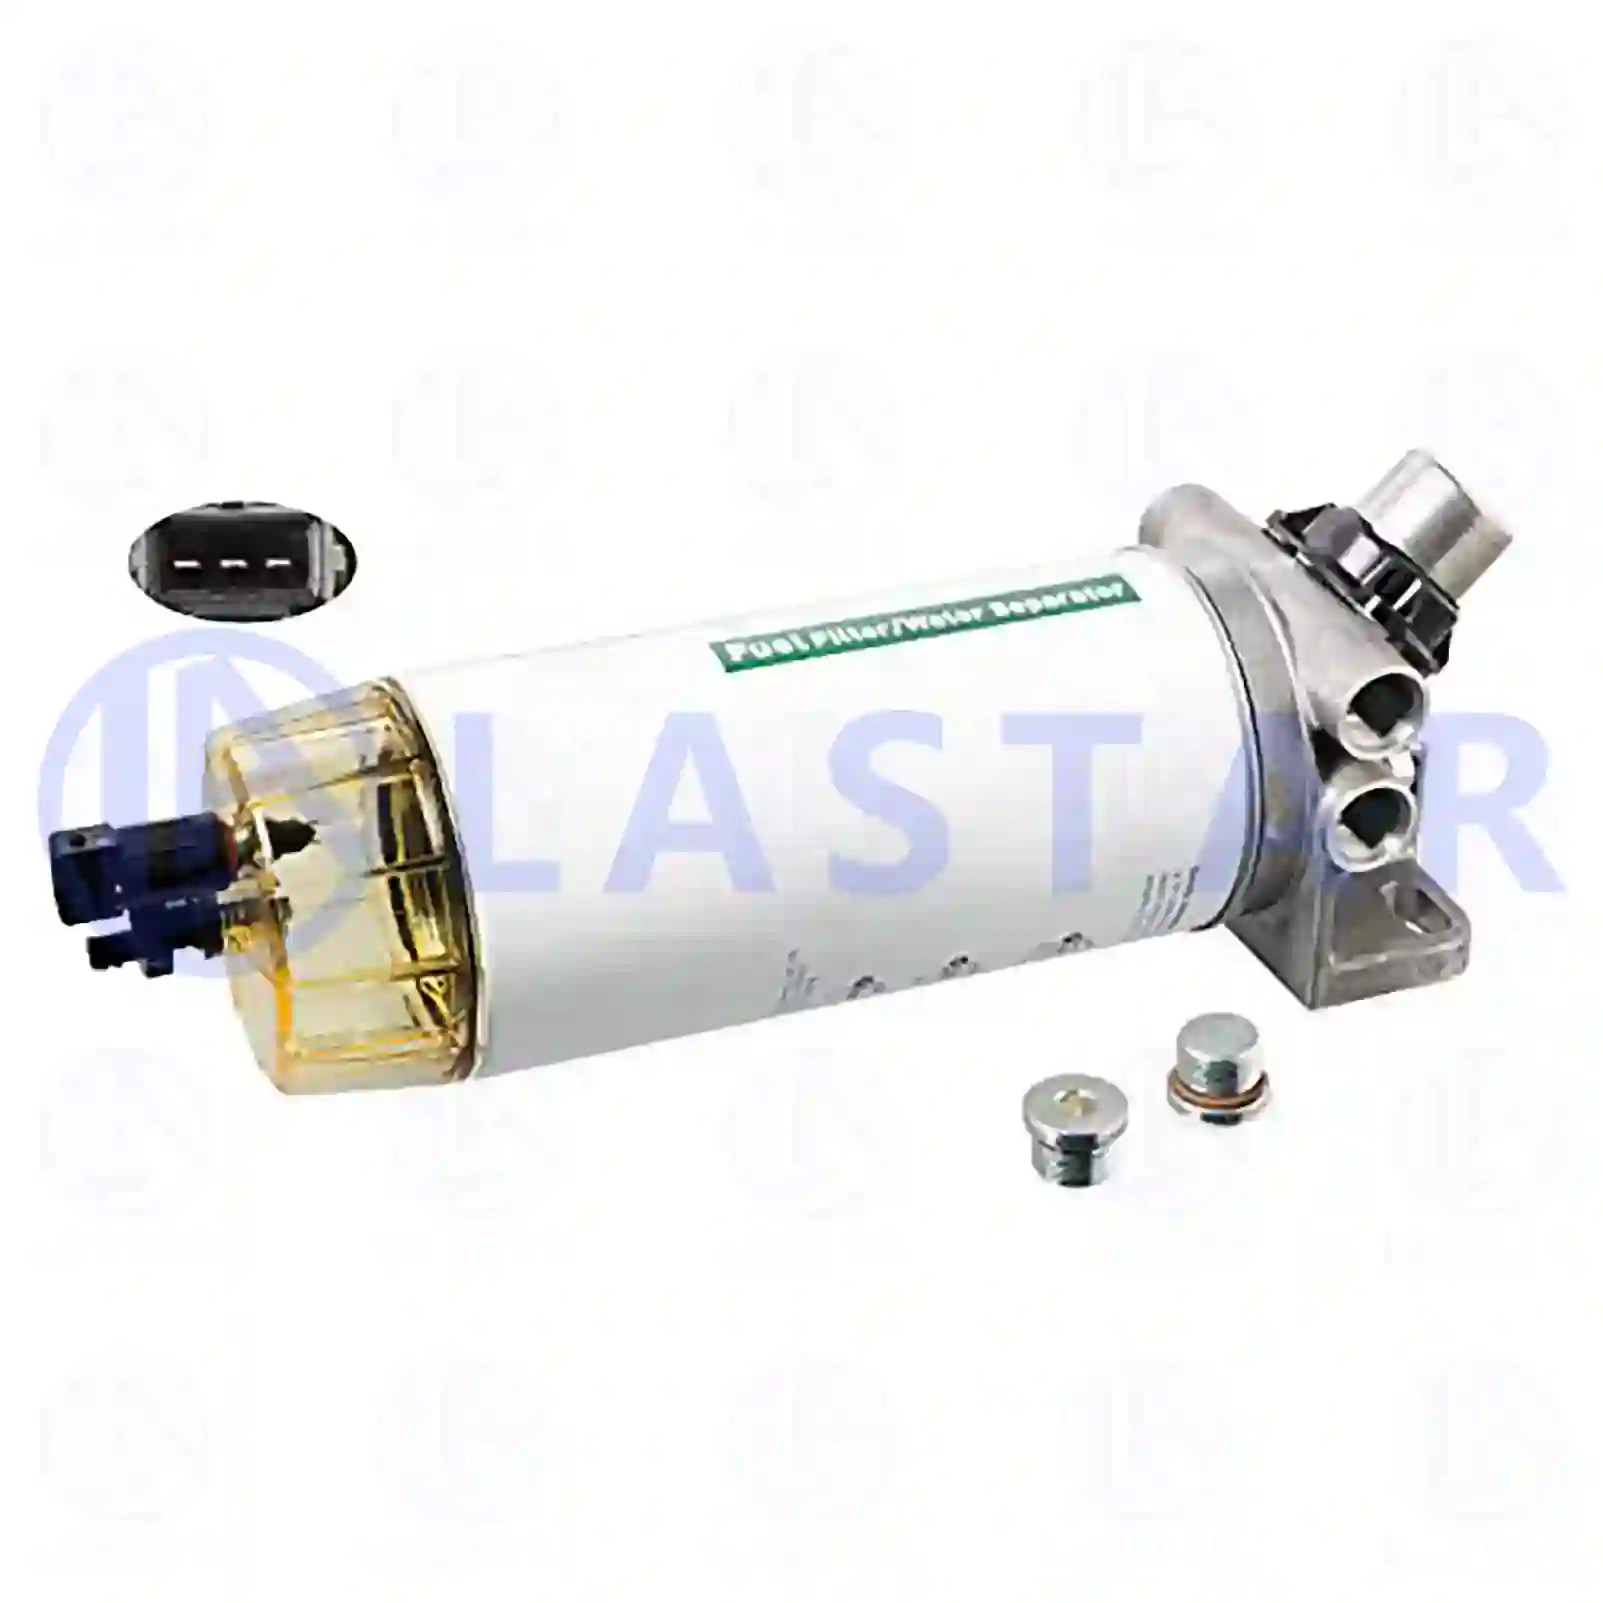 Fuel filter, complete, 77724302, 5801510524 ||  77724302 Lastar Spare Part | Truck Spare Parts, Auotomotive Spare Parts Fuel filter, complete, 77724302, 5801510524 ||  77724302 Lastar Spare Part | Truck Spare Parts, Auotomotive Spare Parts